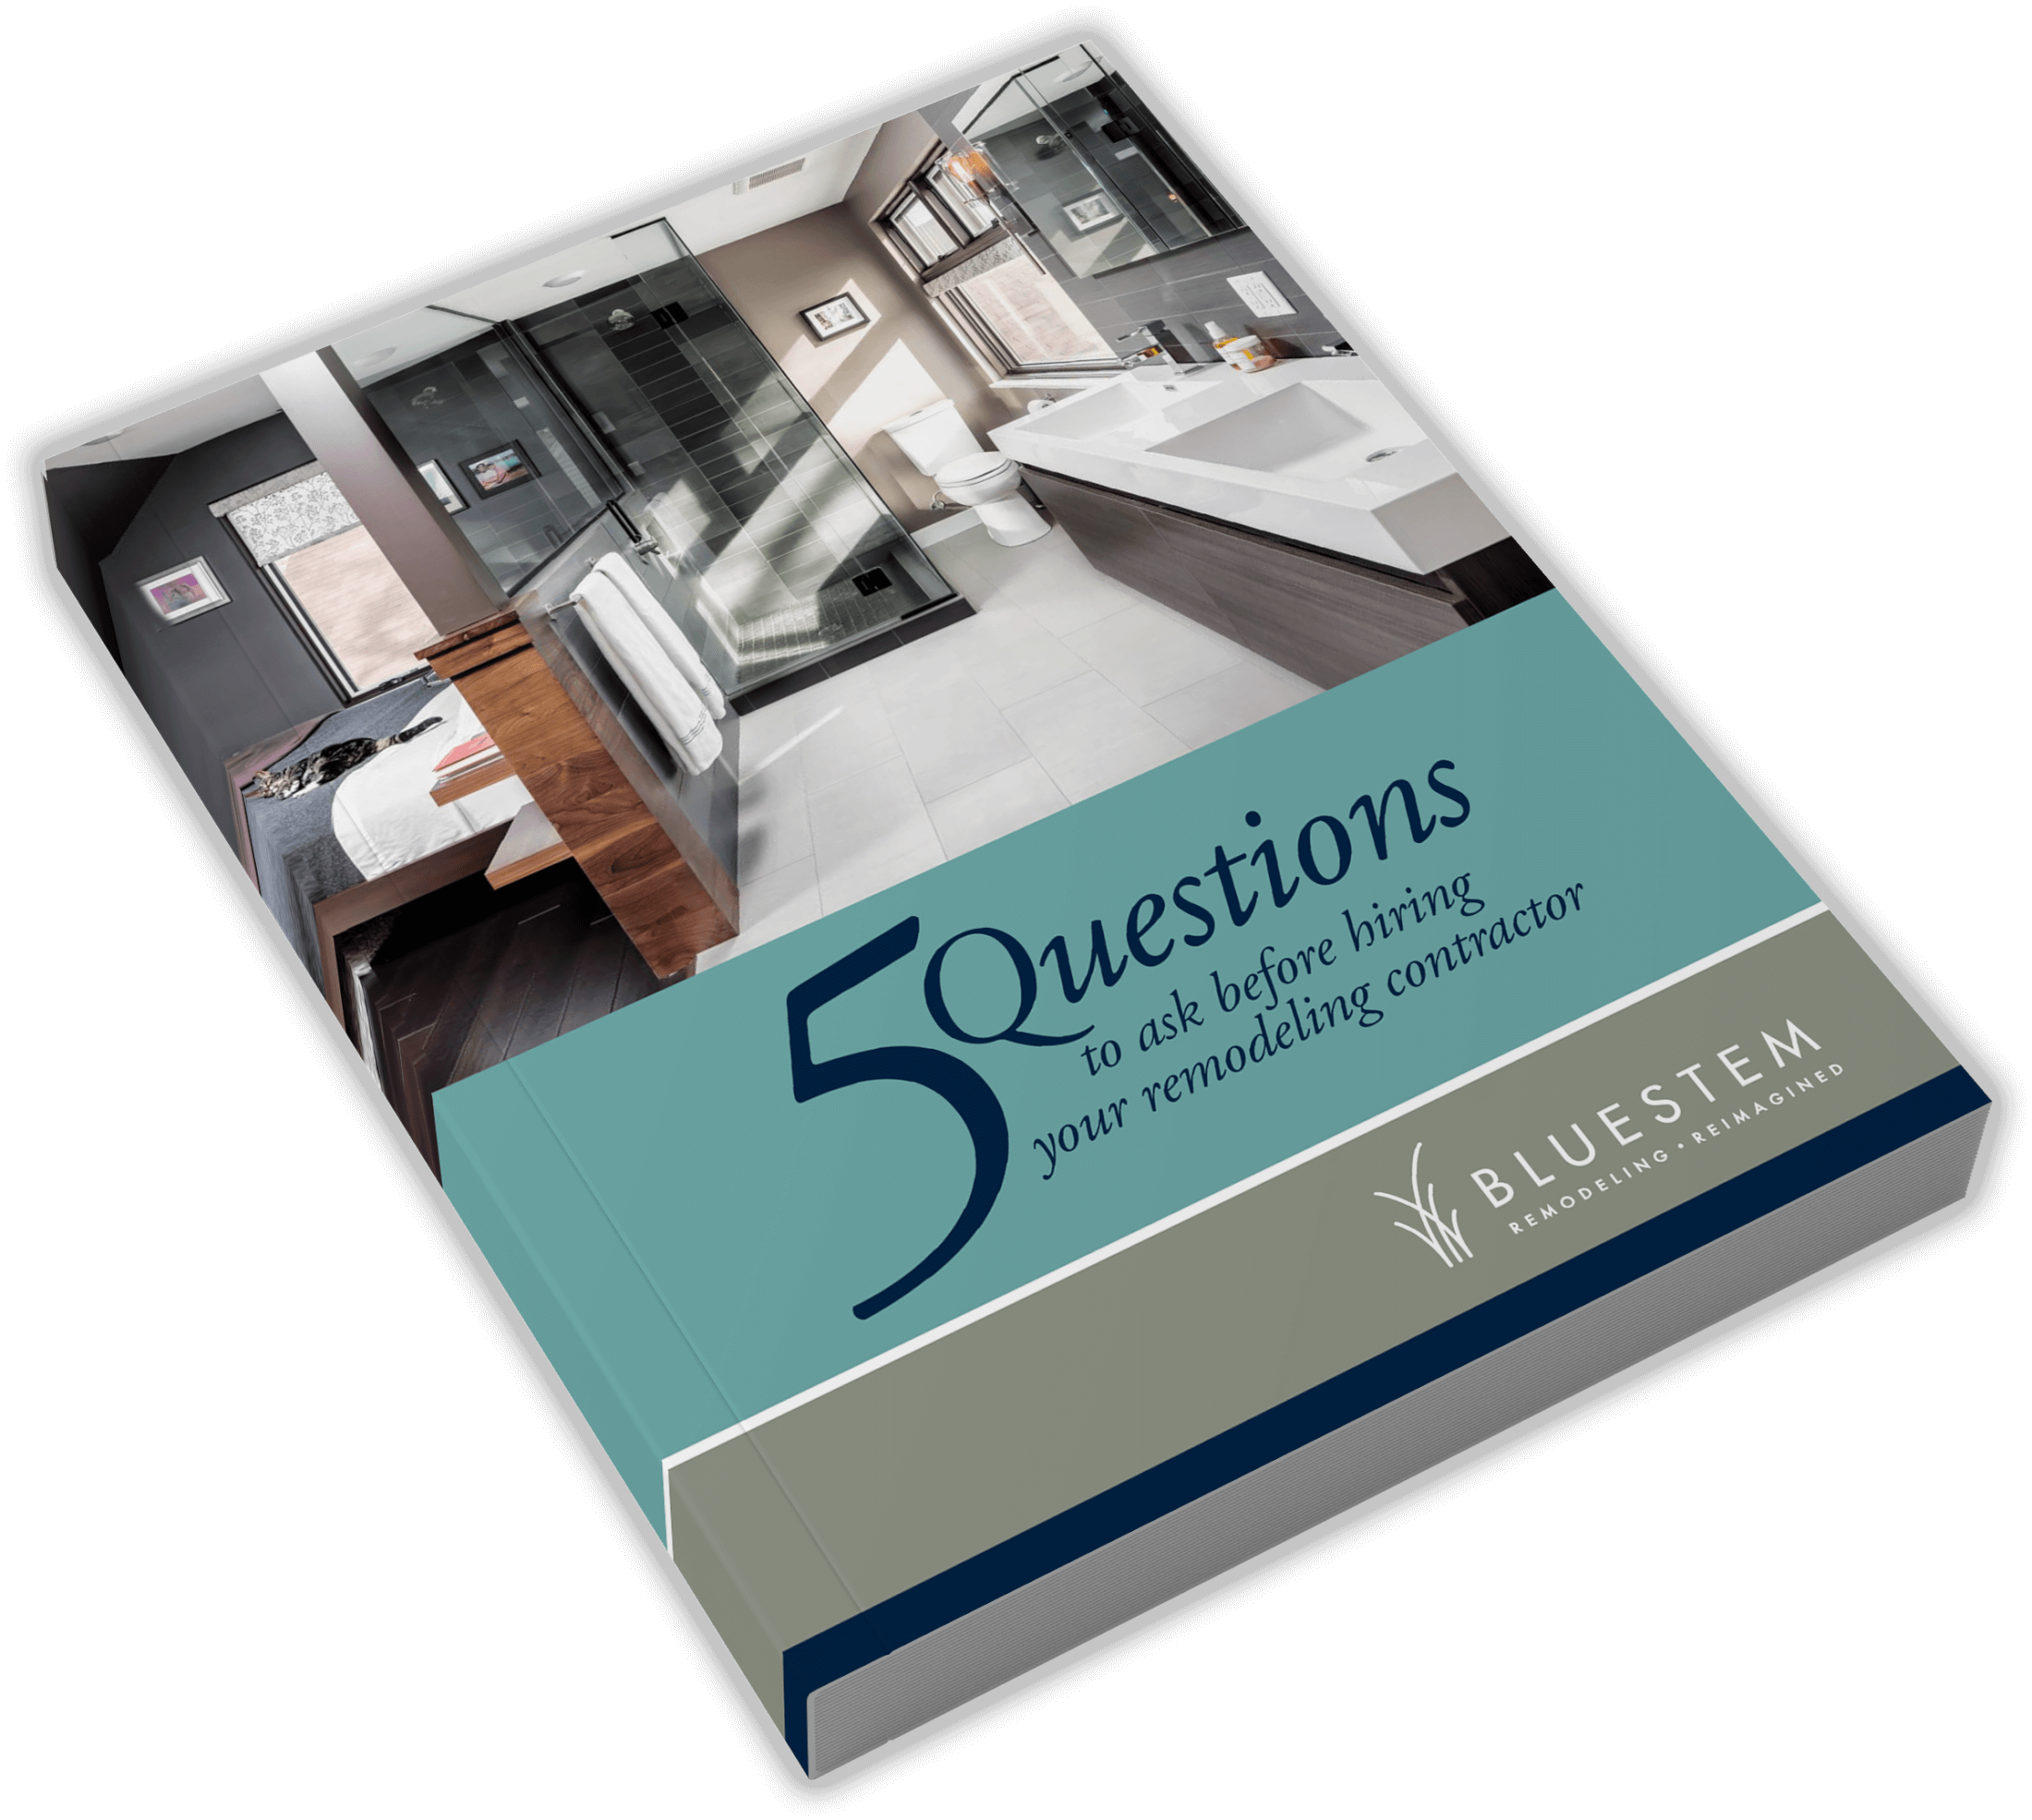 5 Questions to ask your contractor, Bluestem remodeling free eGuide 3d book cover image